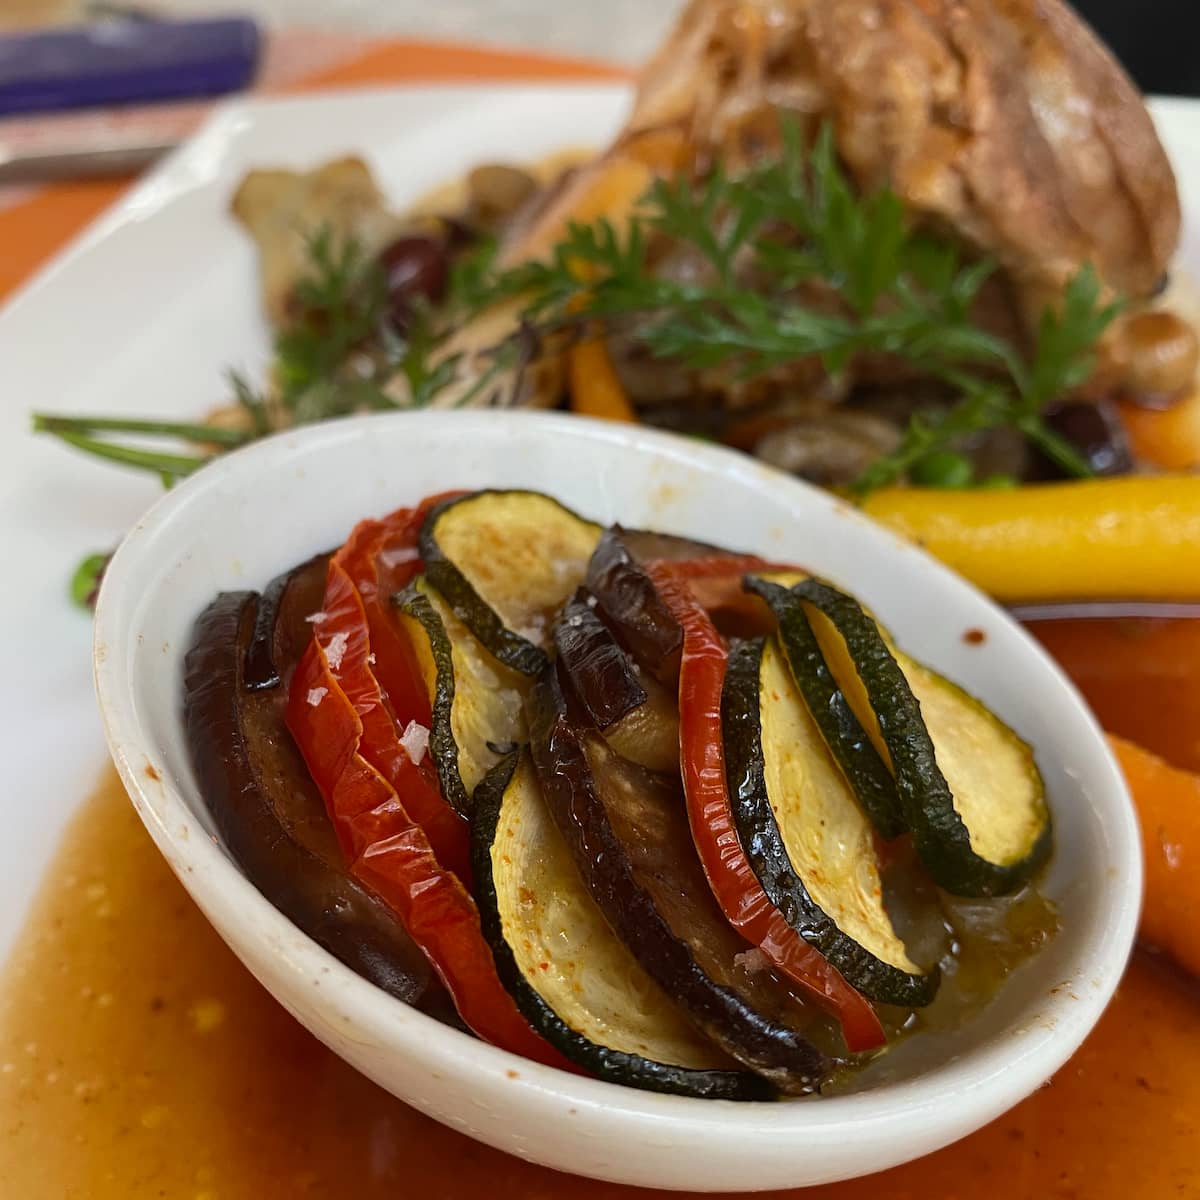 little individual dish of roasted sliced vegetables